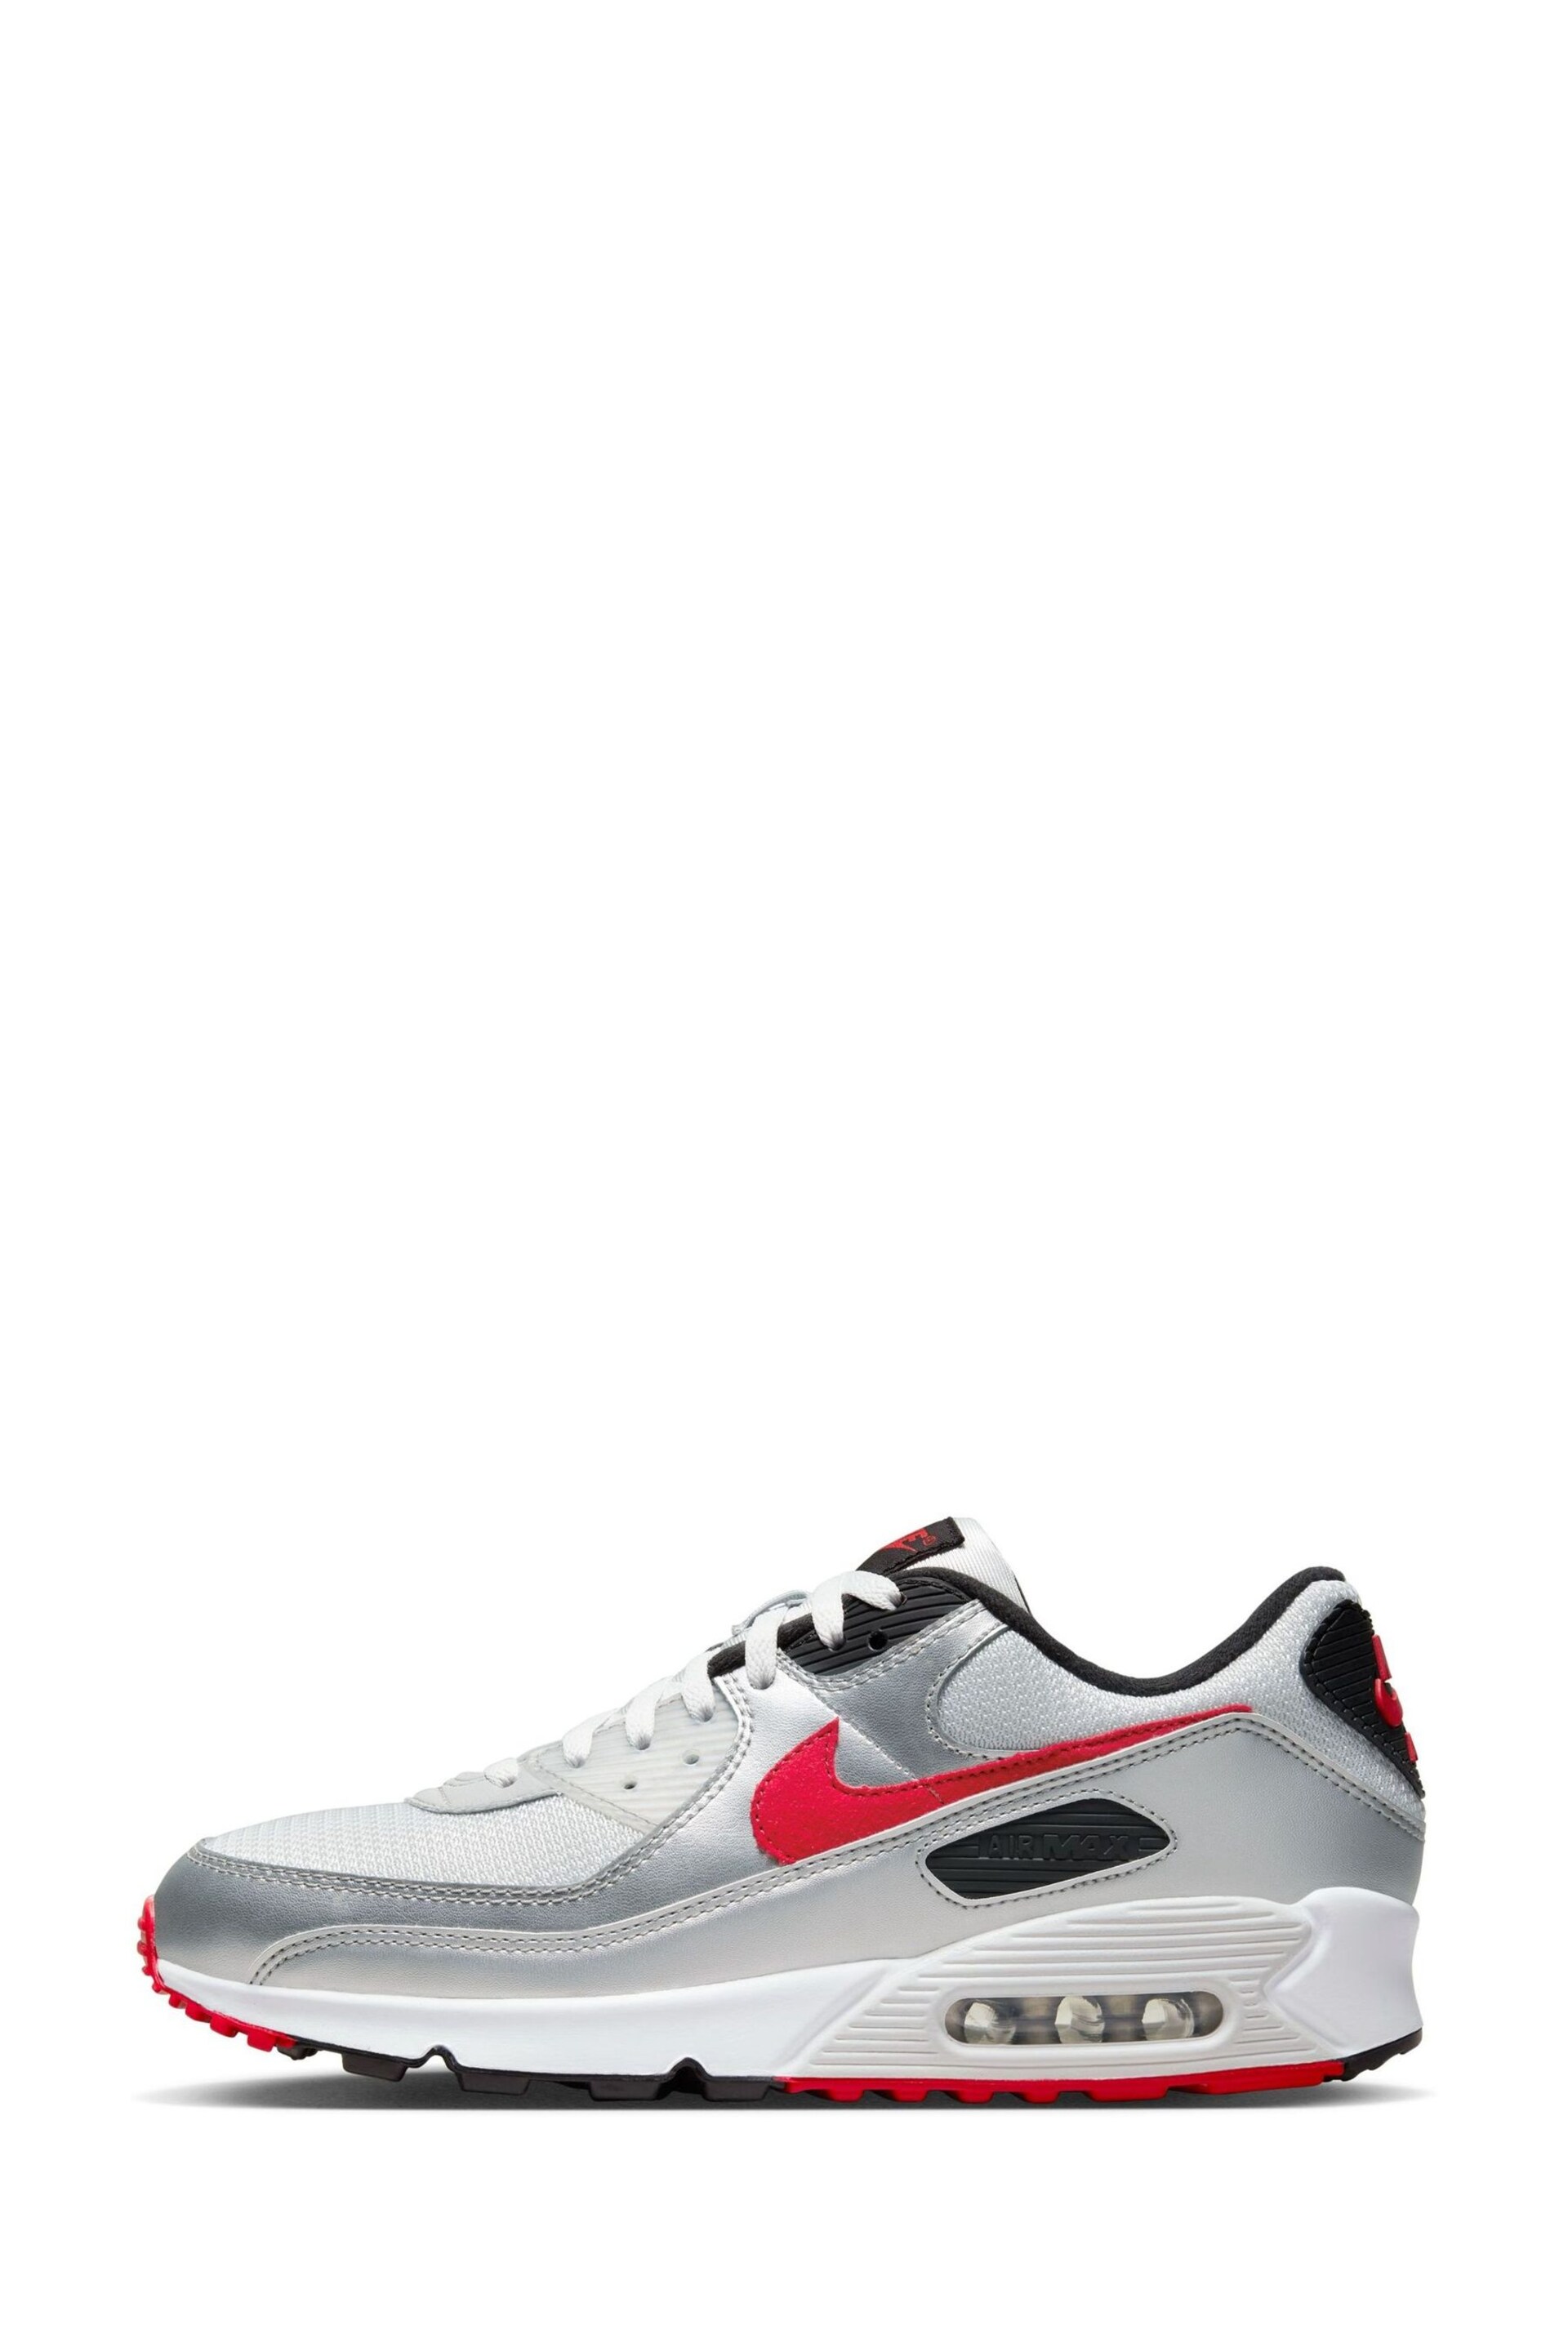 Nike Grey/Red Air Max 90 Trainers - Image 4 of 9